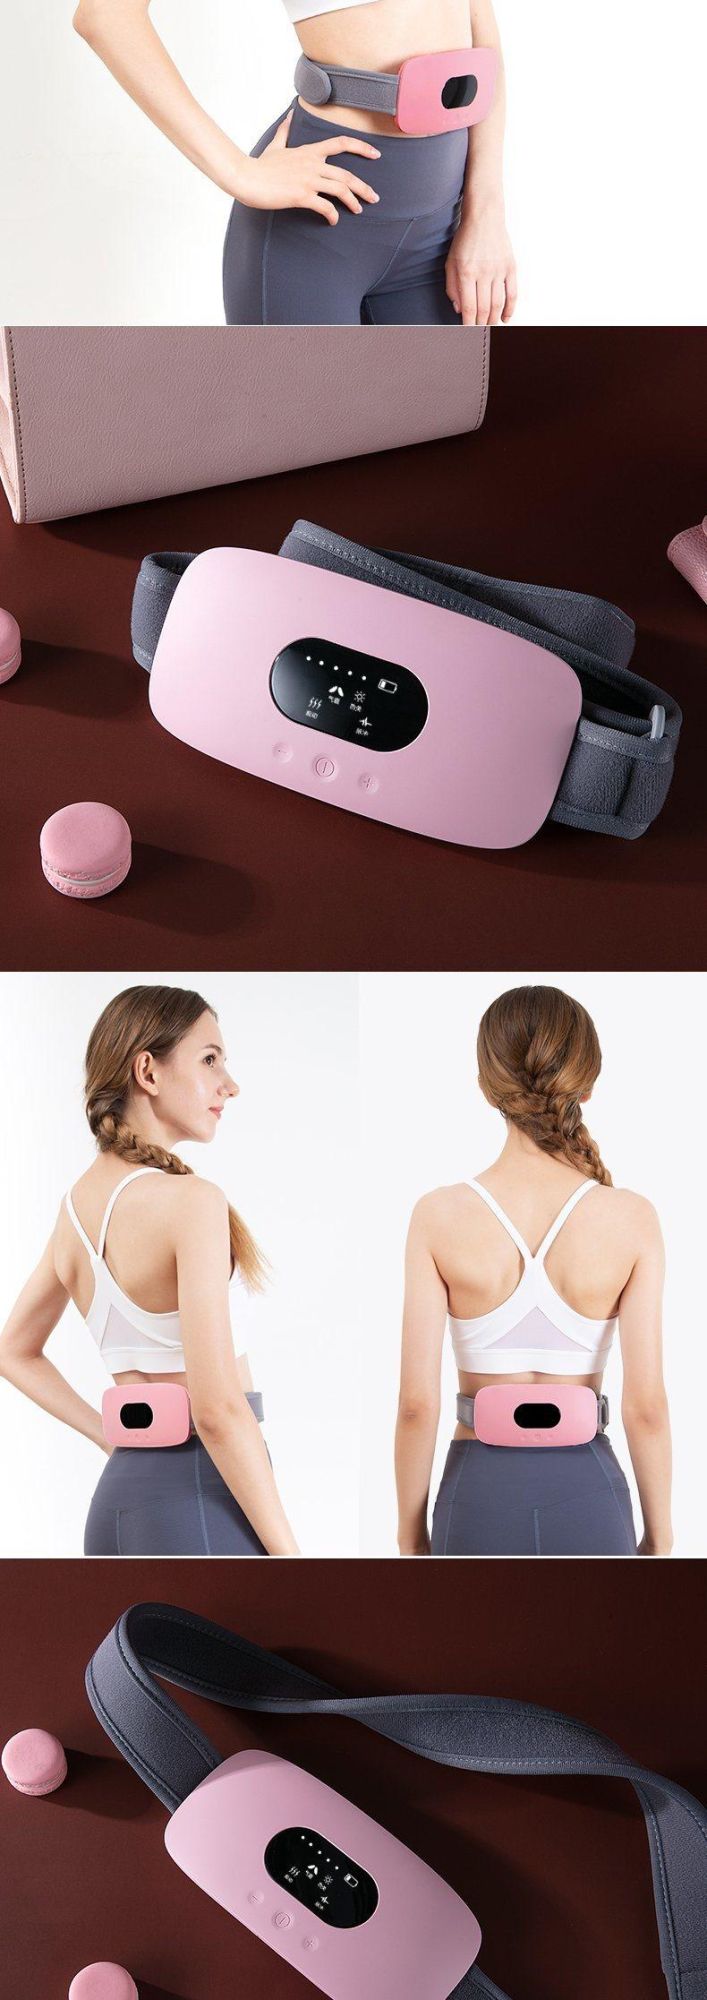 Hezheng Electric Pulse Vibrating Fitness Burning Fat Lose Weight Slimming Belly Pain Abdomen Massager